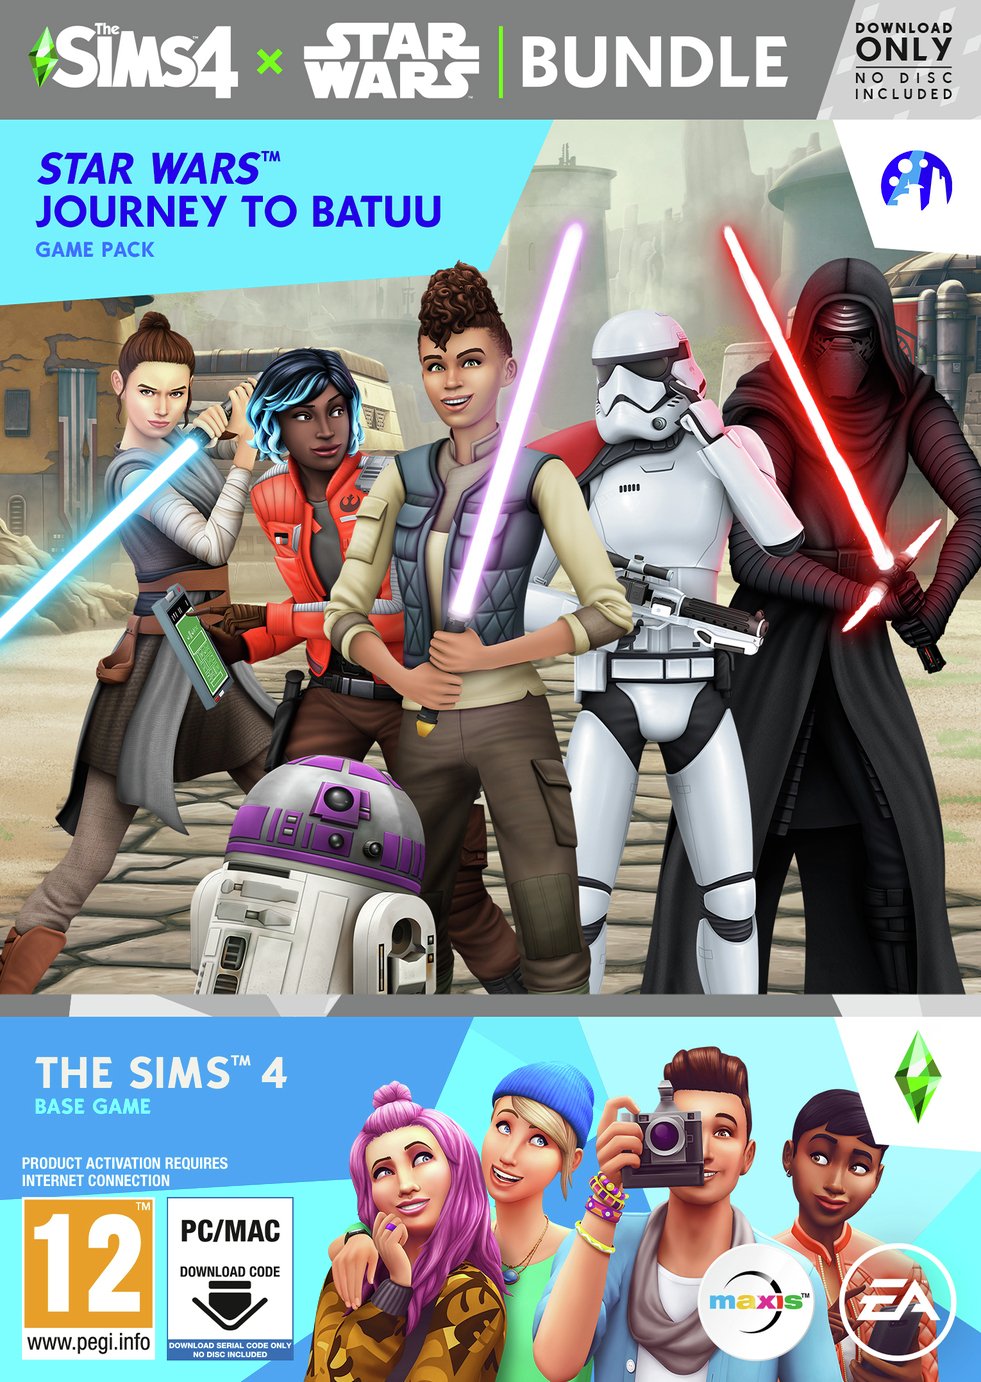 The Sims 4 Star Wars Bundle PC Game Review